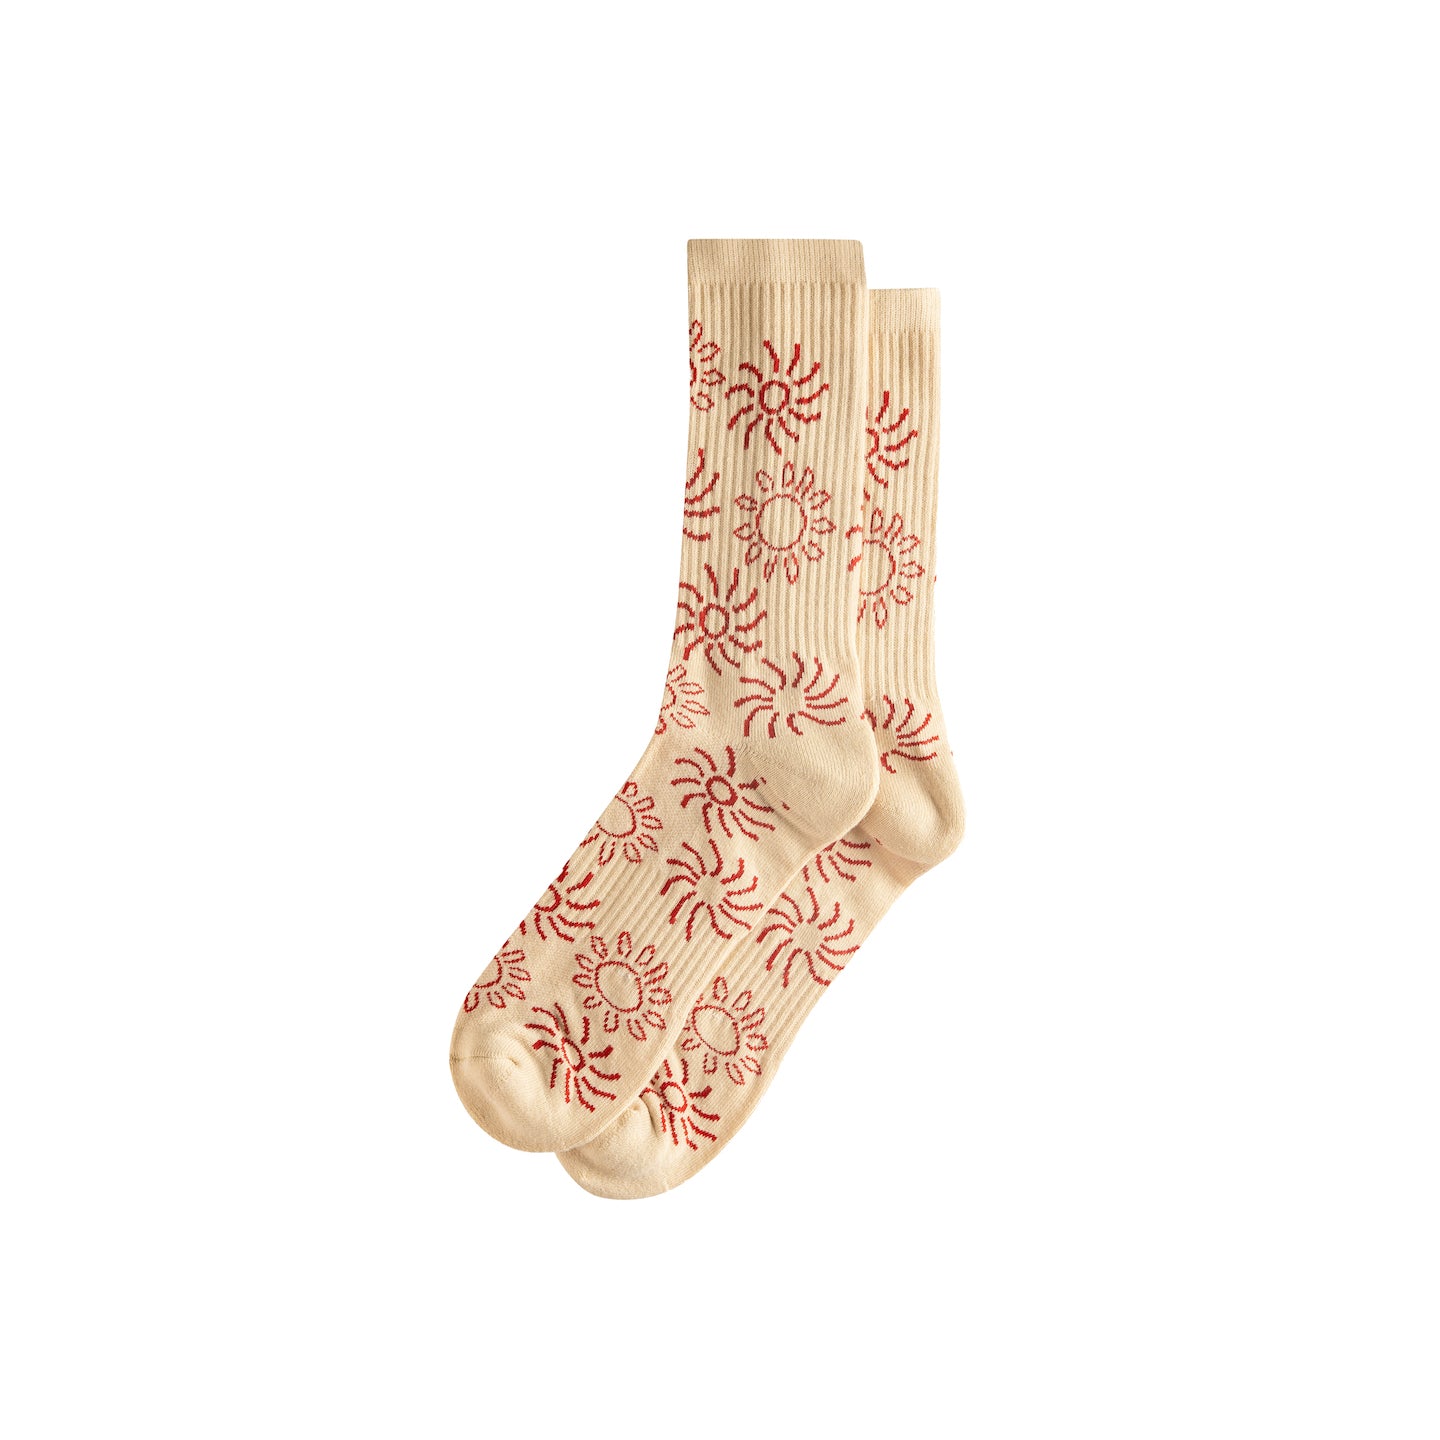 Mosaic Cotton Socks in Cream Color by Her Kai & I. It features an multi-sun print design in red